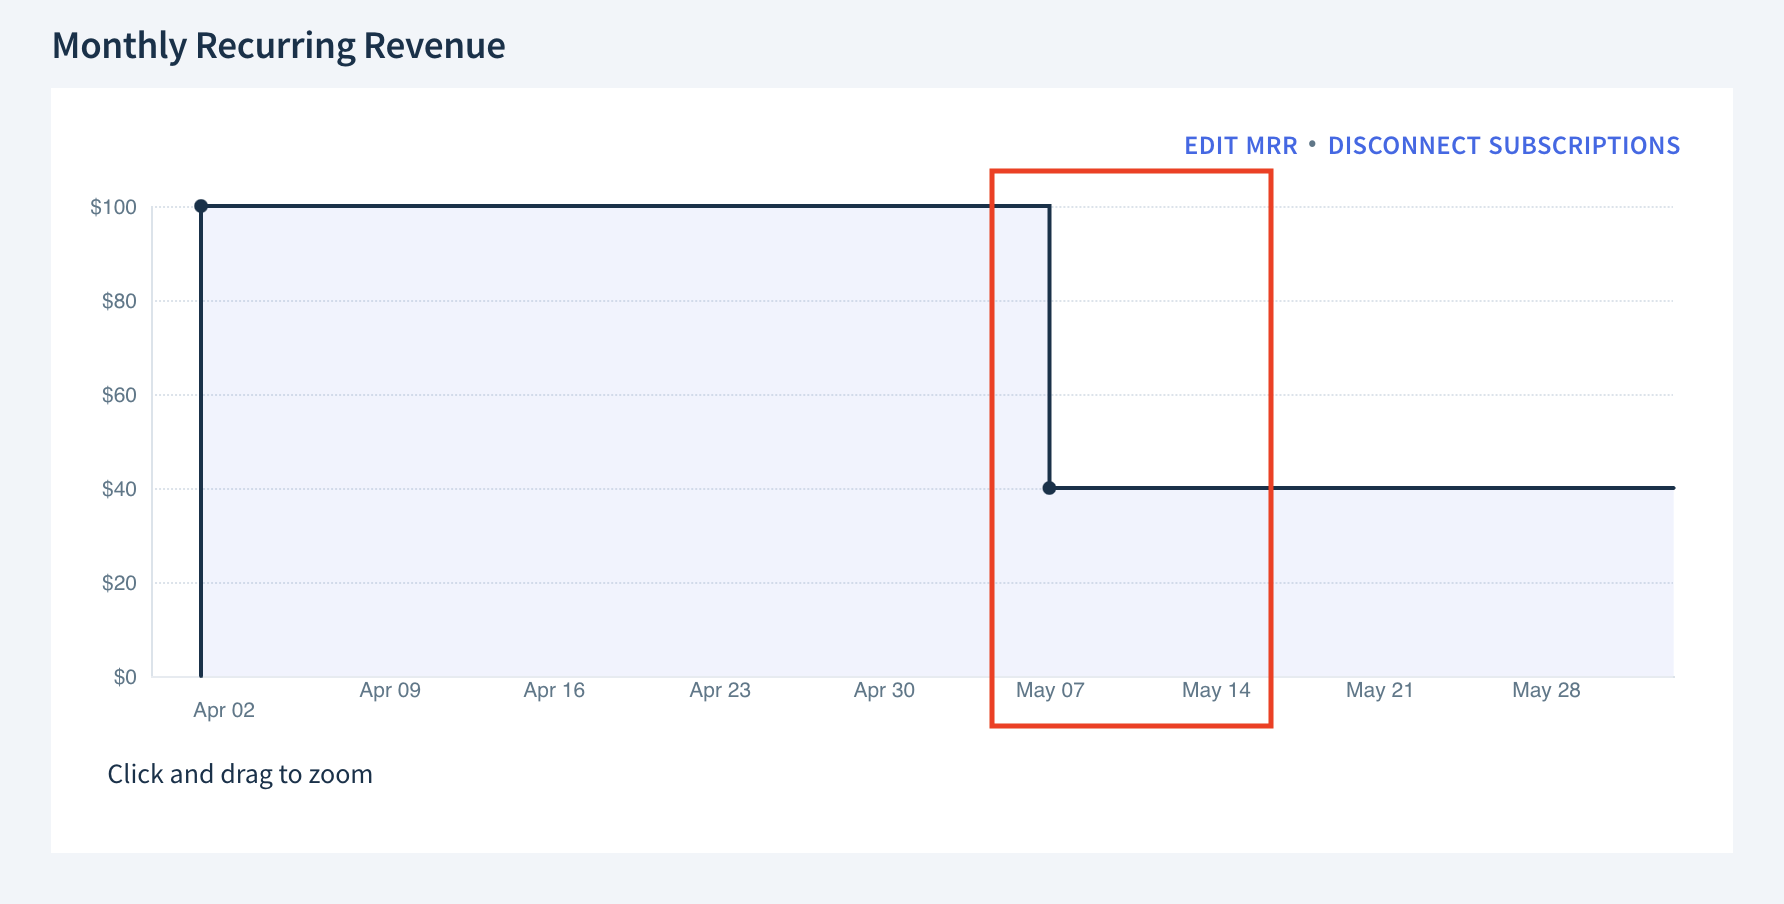 Screenshot of the Monthly Recurring Revenue graph from the previous figure after connecting the two subscriptions. Now there is one subscription that starts at the beginning of April and is still active. The subscription starts with an MRR of 100 dollars. On May 7th, which is the beginning of the most recent subscription, the MRR changes to 40 dollars. This means that the overlapping period from May 7th to May 14th has been filled with the MRR of the most recent subscription, and the MRR of the older subscription has been ignored in this period.